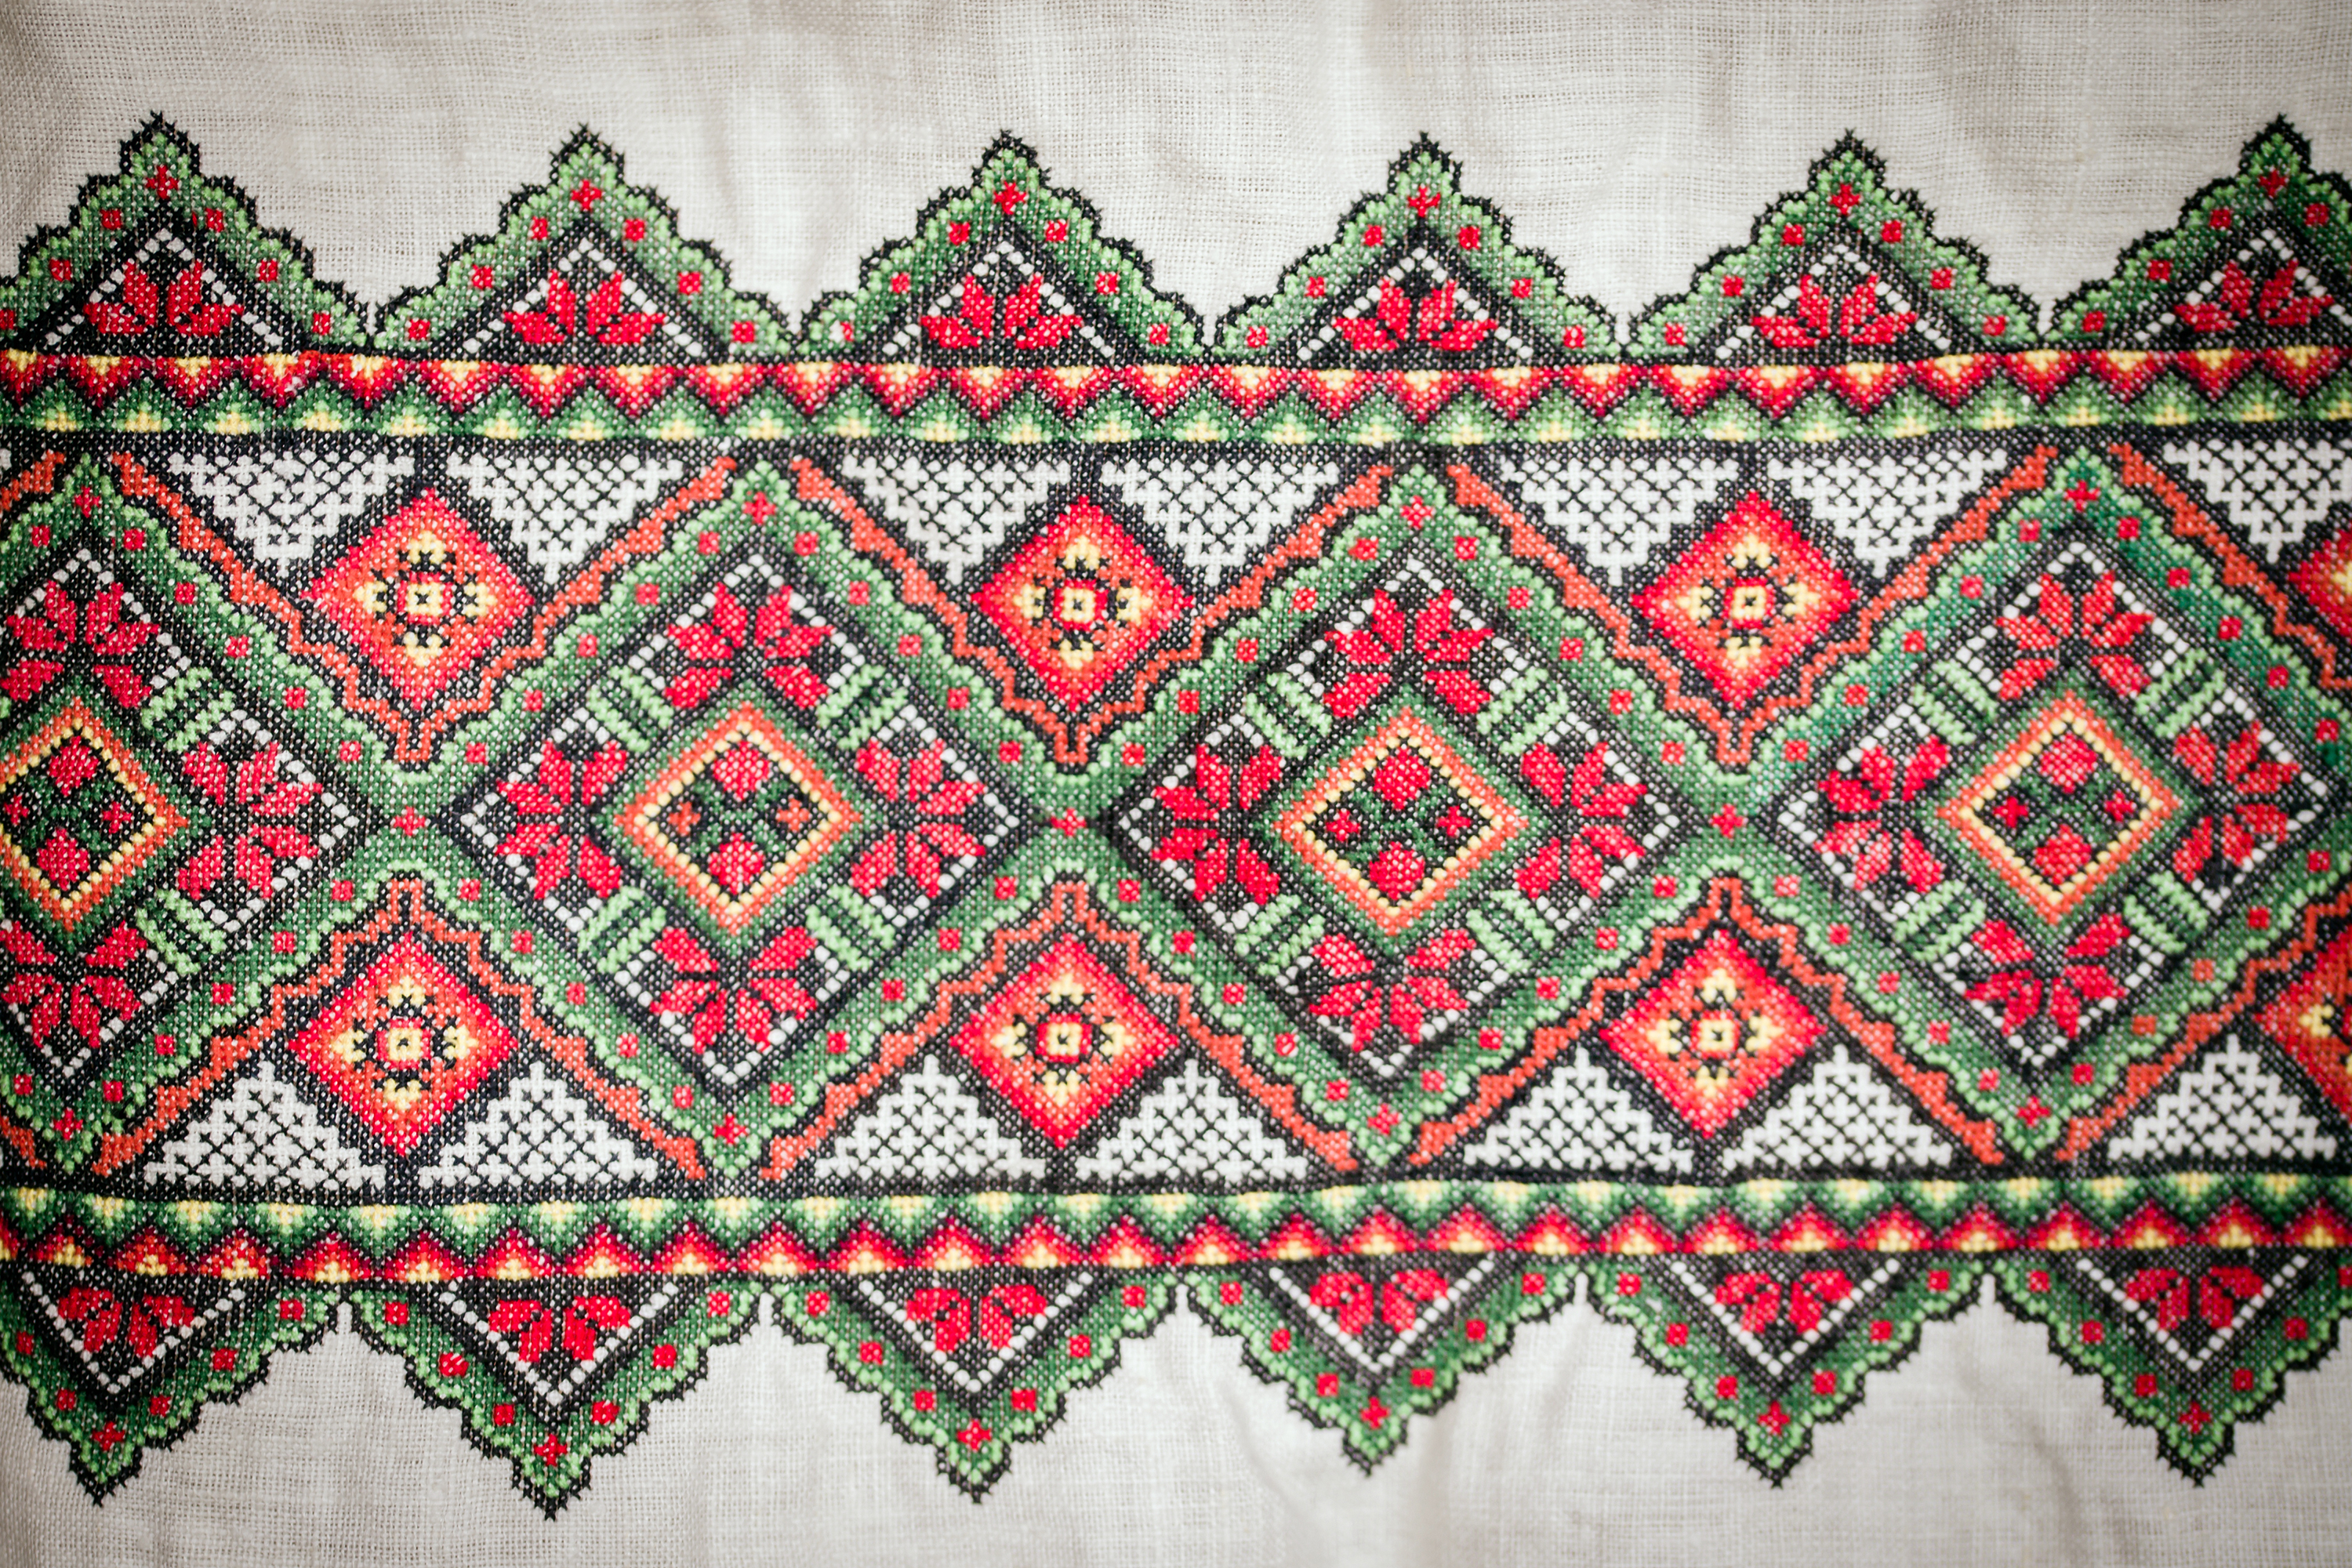 Part of a ceremonial towel from the border of Poland and Ukraine.